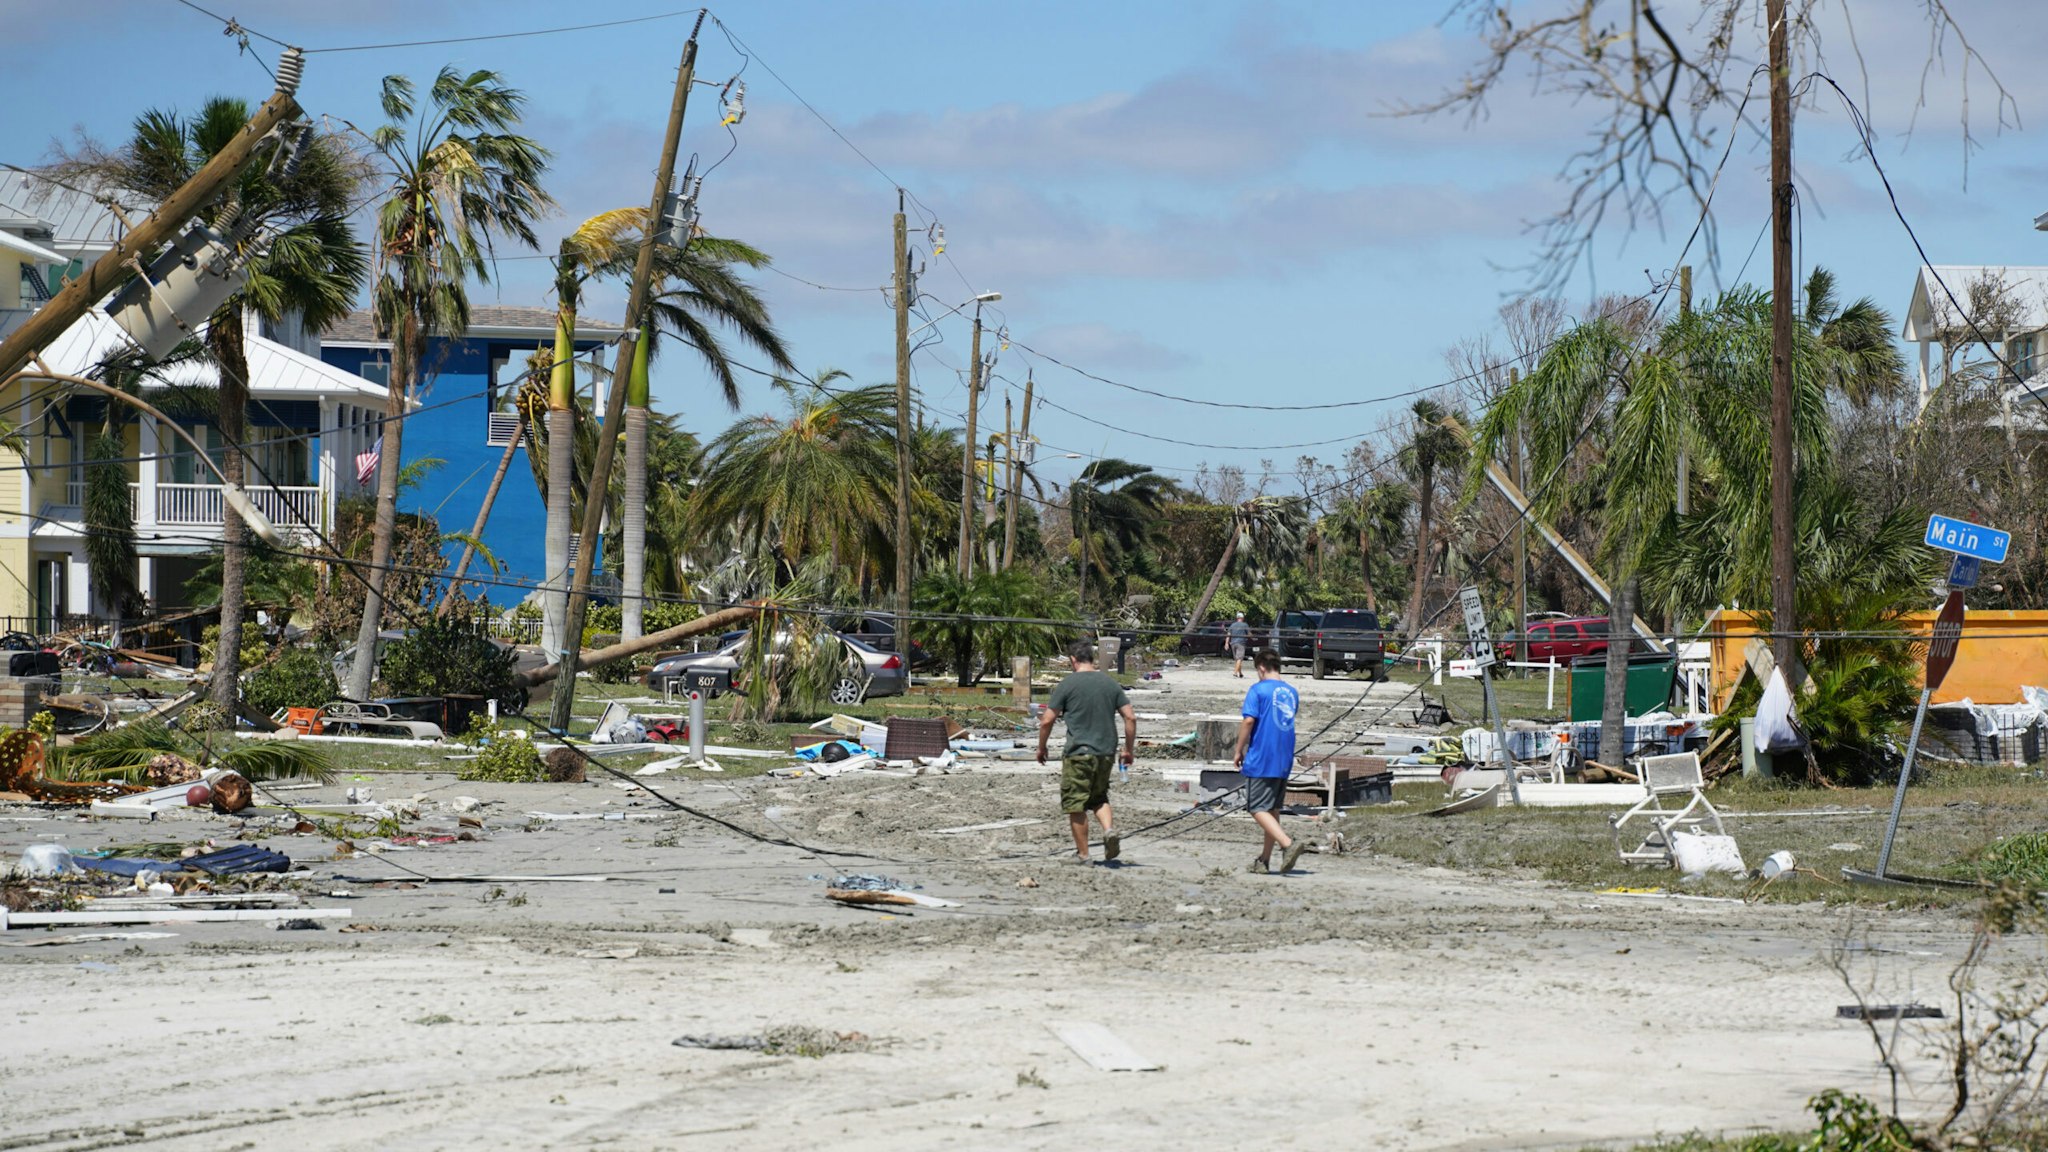 A general view from the site after Hurricane Ian left Florida on Thursday following making landfall as a devastating Category 4 hurricane, on September 29, 2022 in Florida, United States.